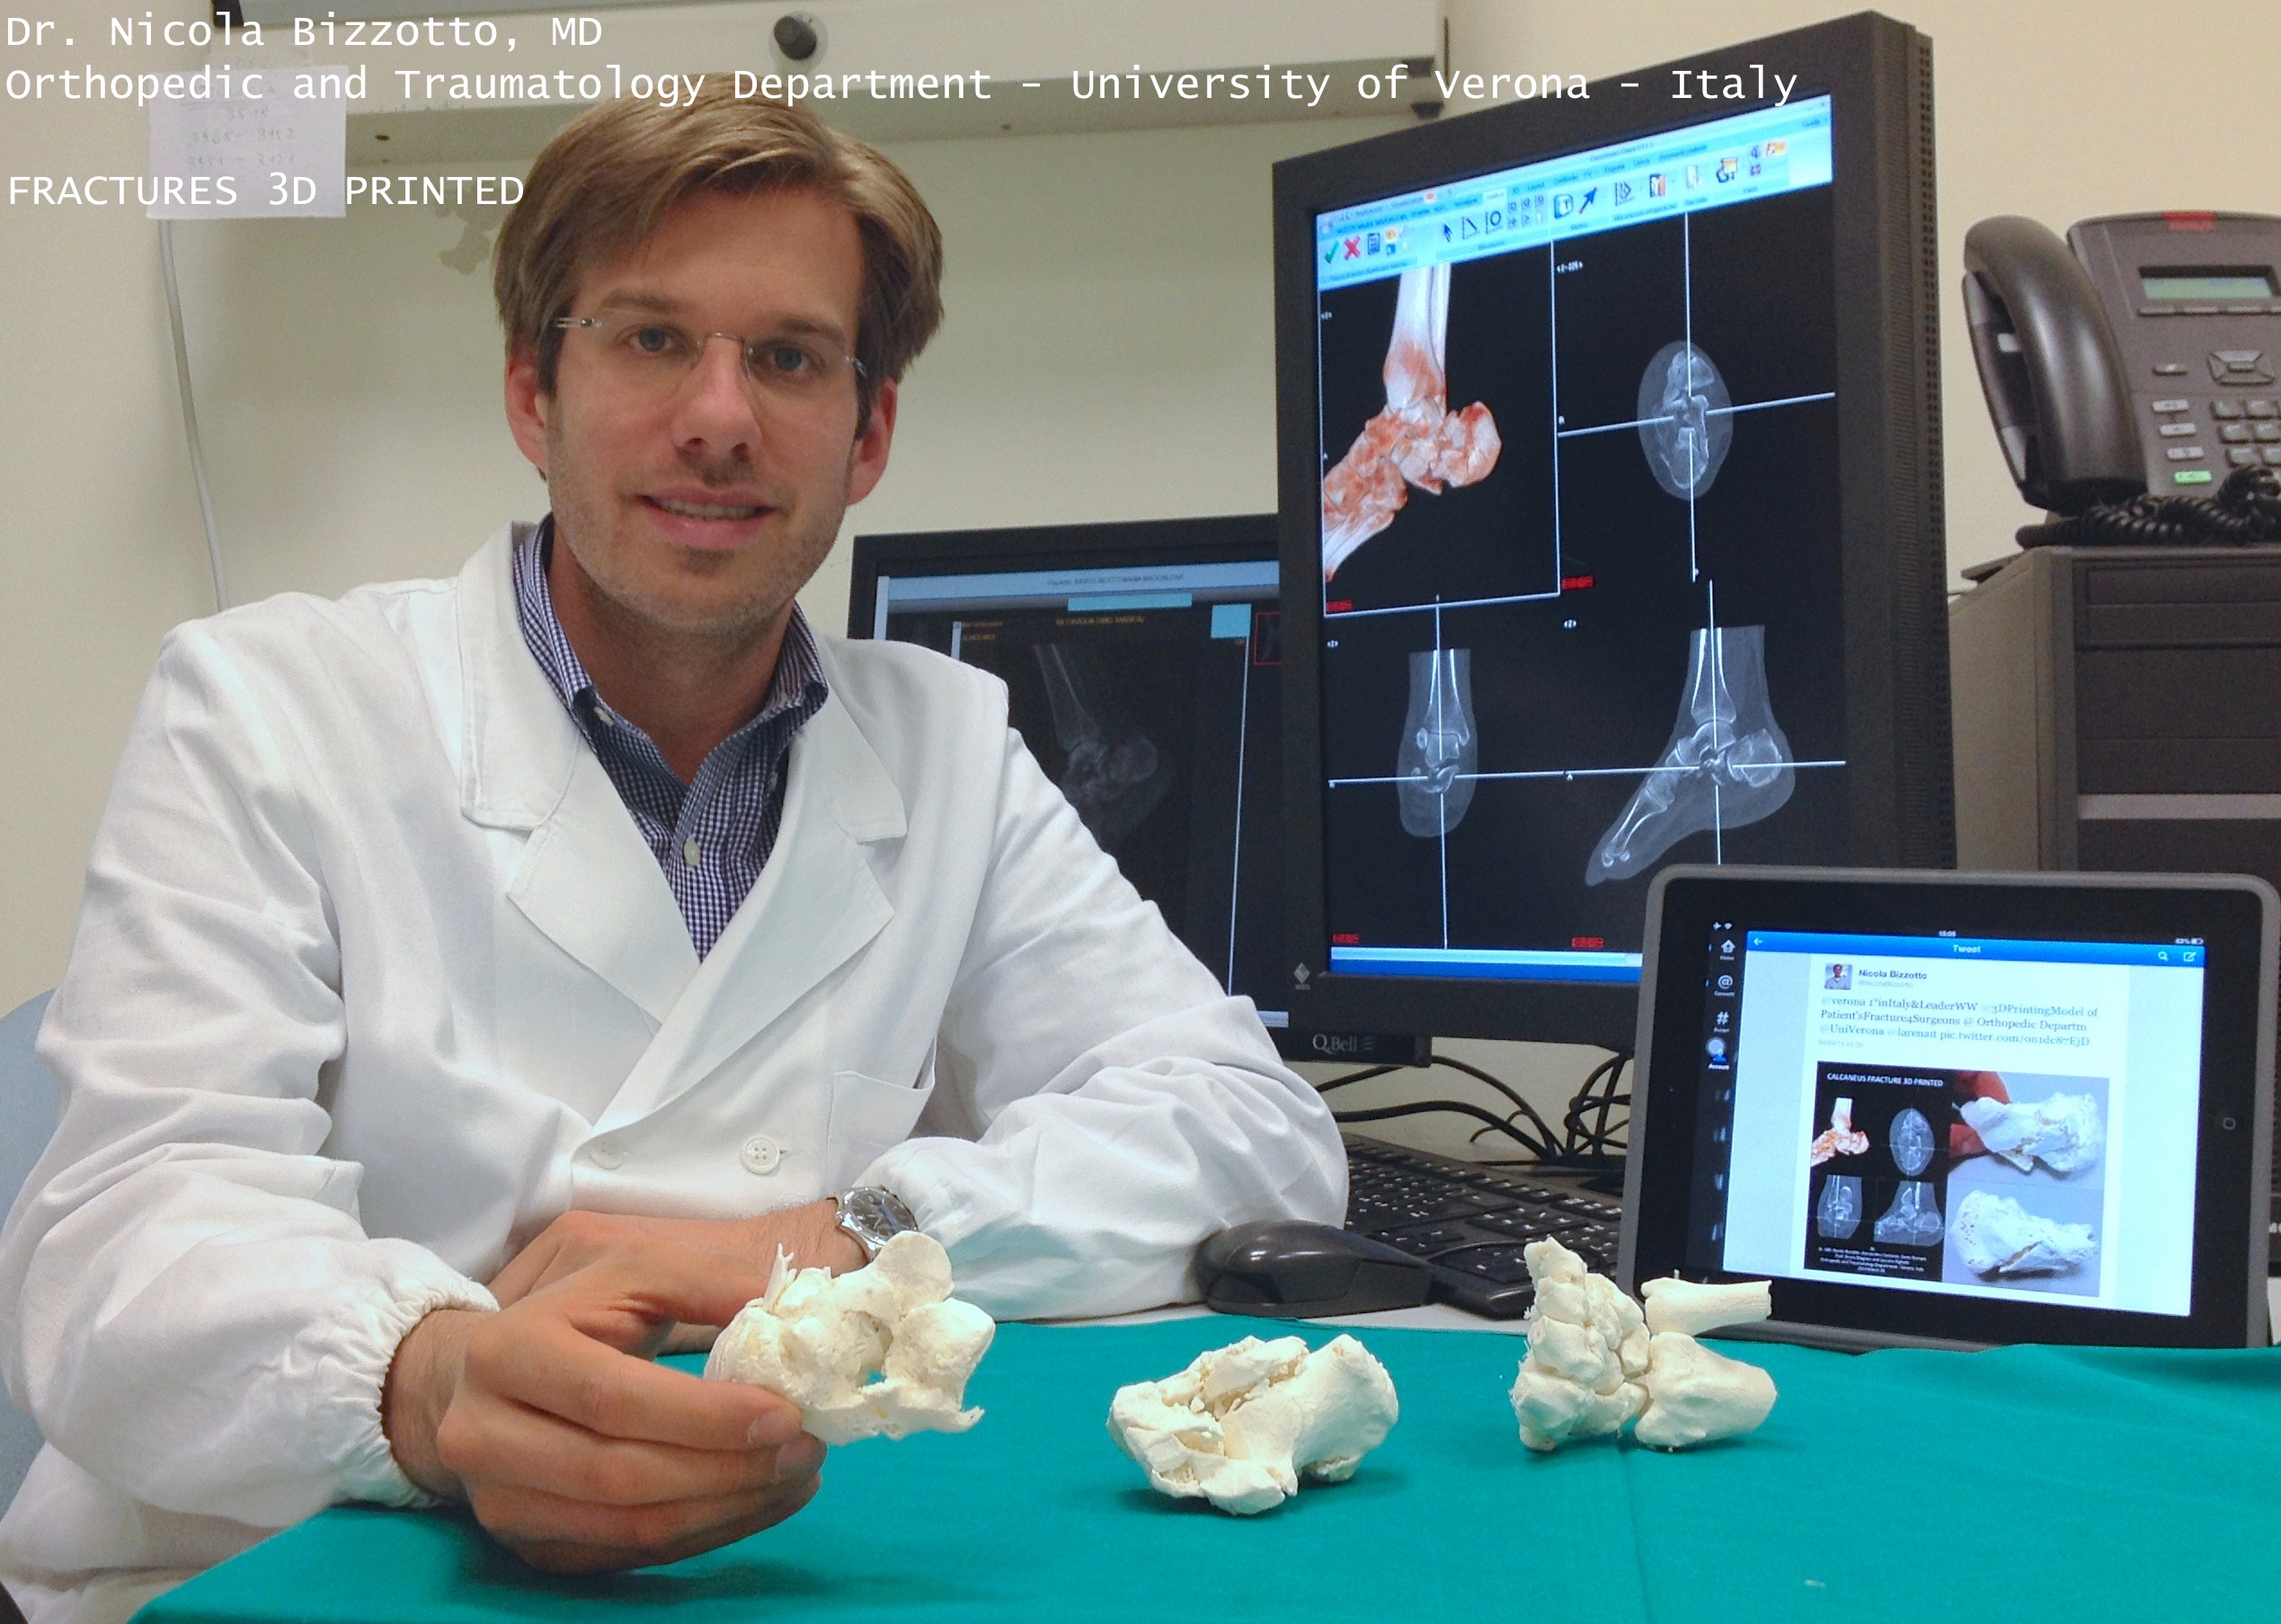 Dr. Bizzotto and his 3D printed bone replicas